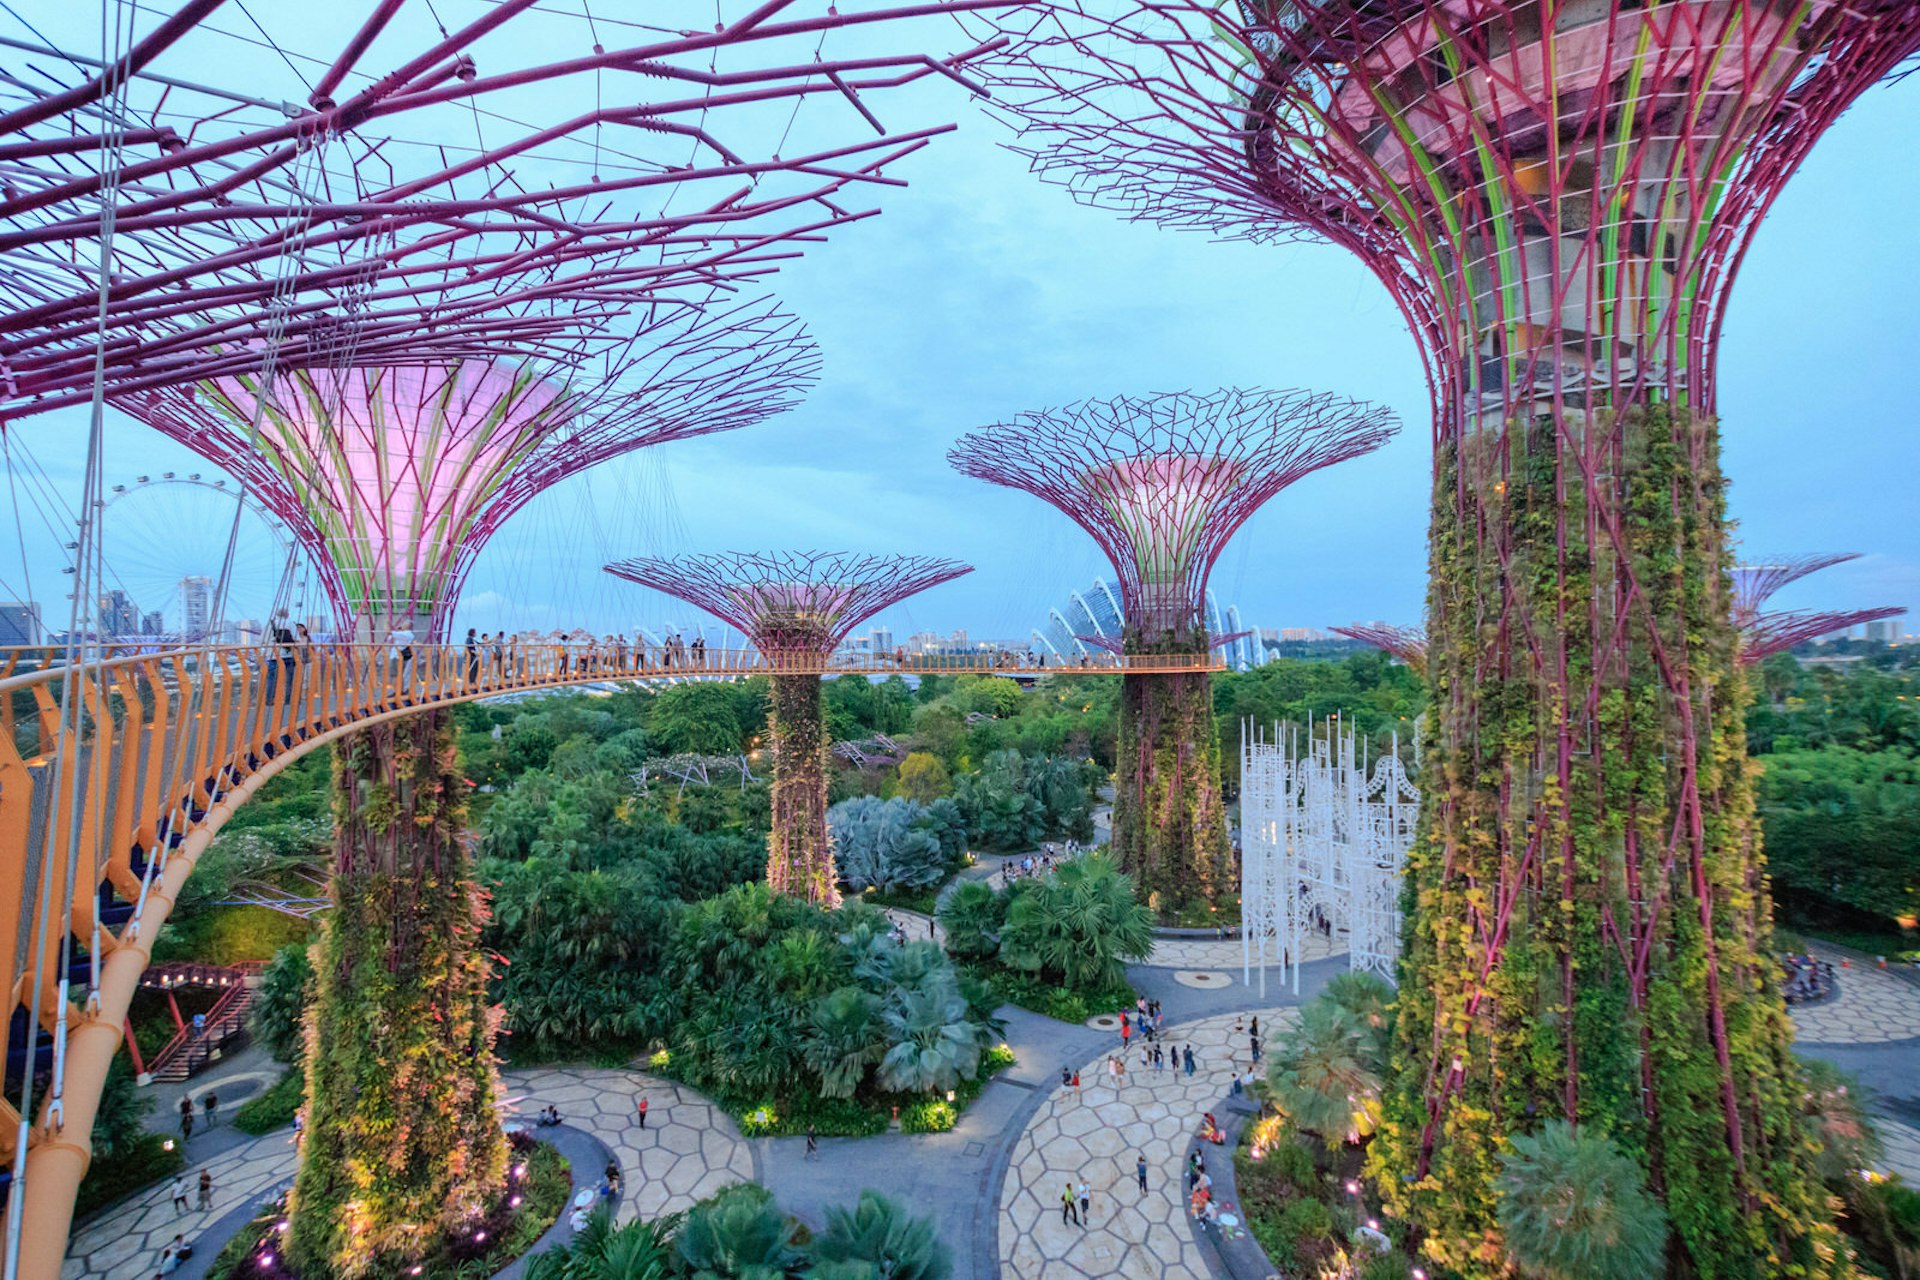 The tall Supertree Grove structures at Gardens by the Bay viewed from the high walkway © FuuTaMin / Shutterstock